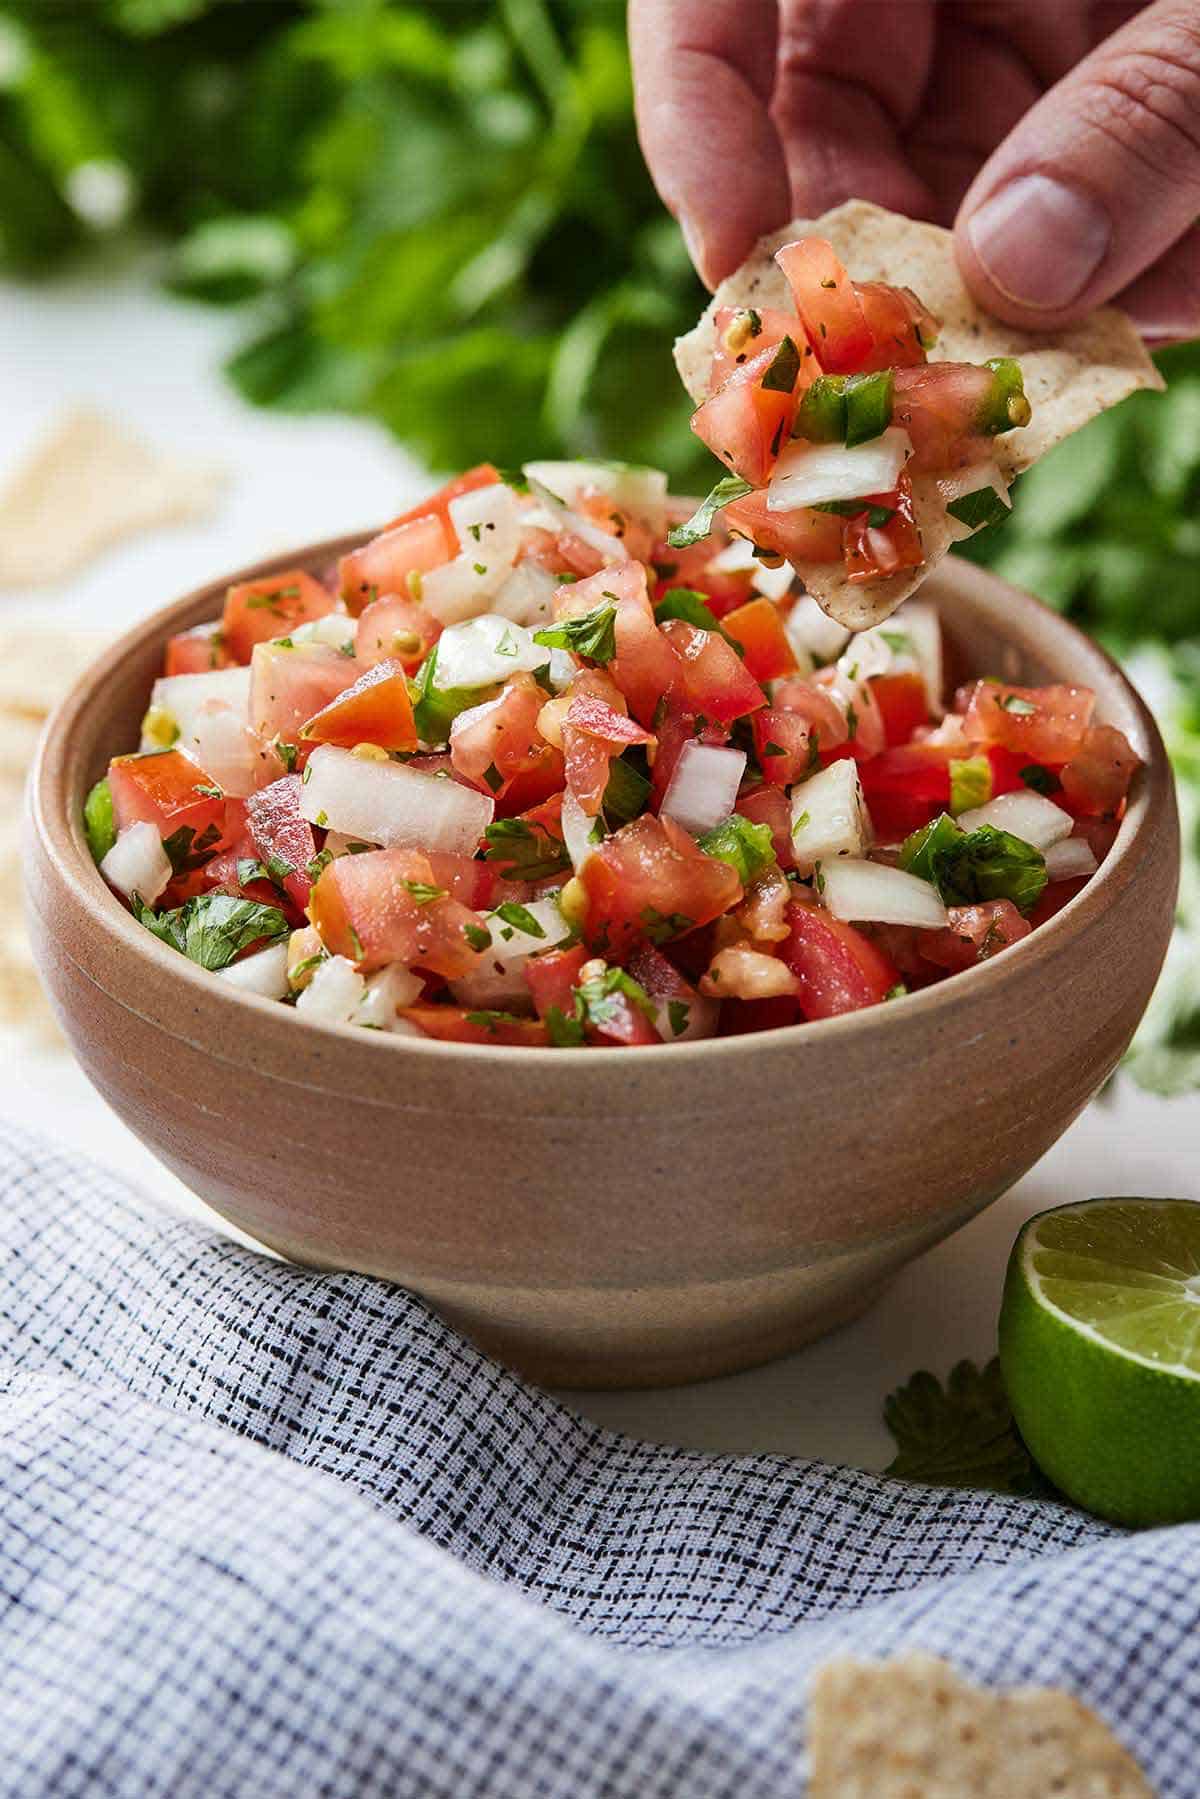 A chip scooping out pico de gallo from a bowl in front of a bunch of cilantro.